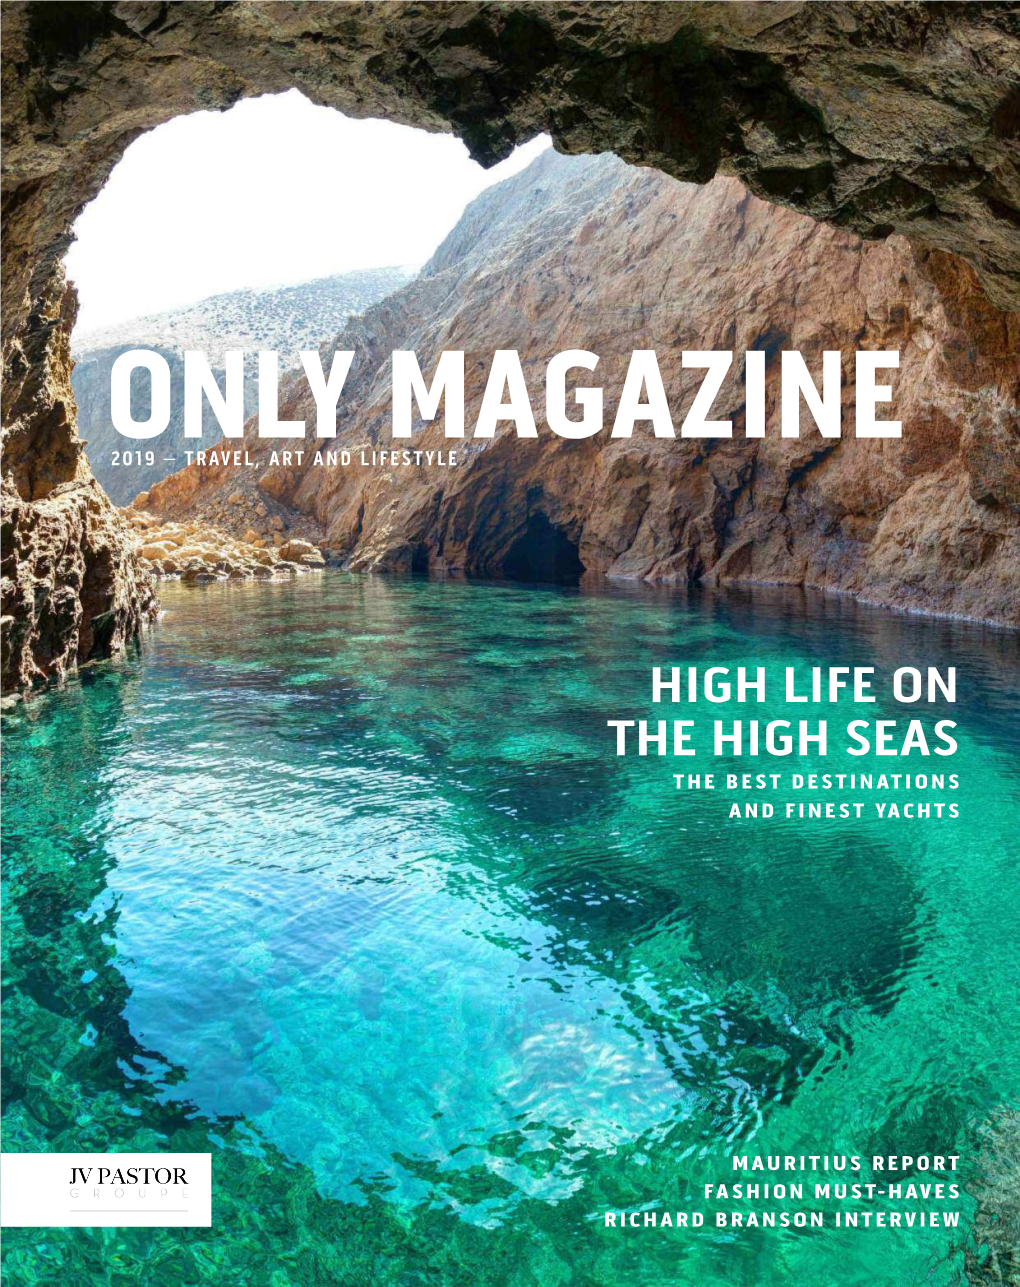 Only Magazine 2019 – Travel, Art and Lifestyle